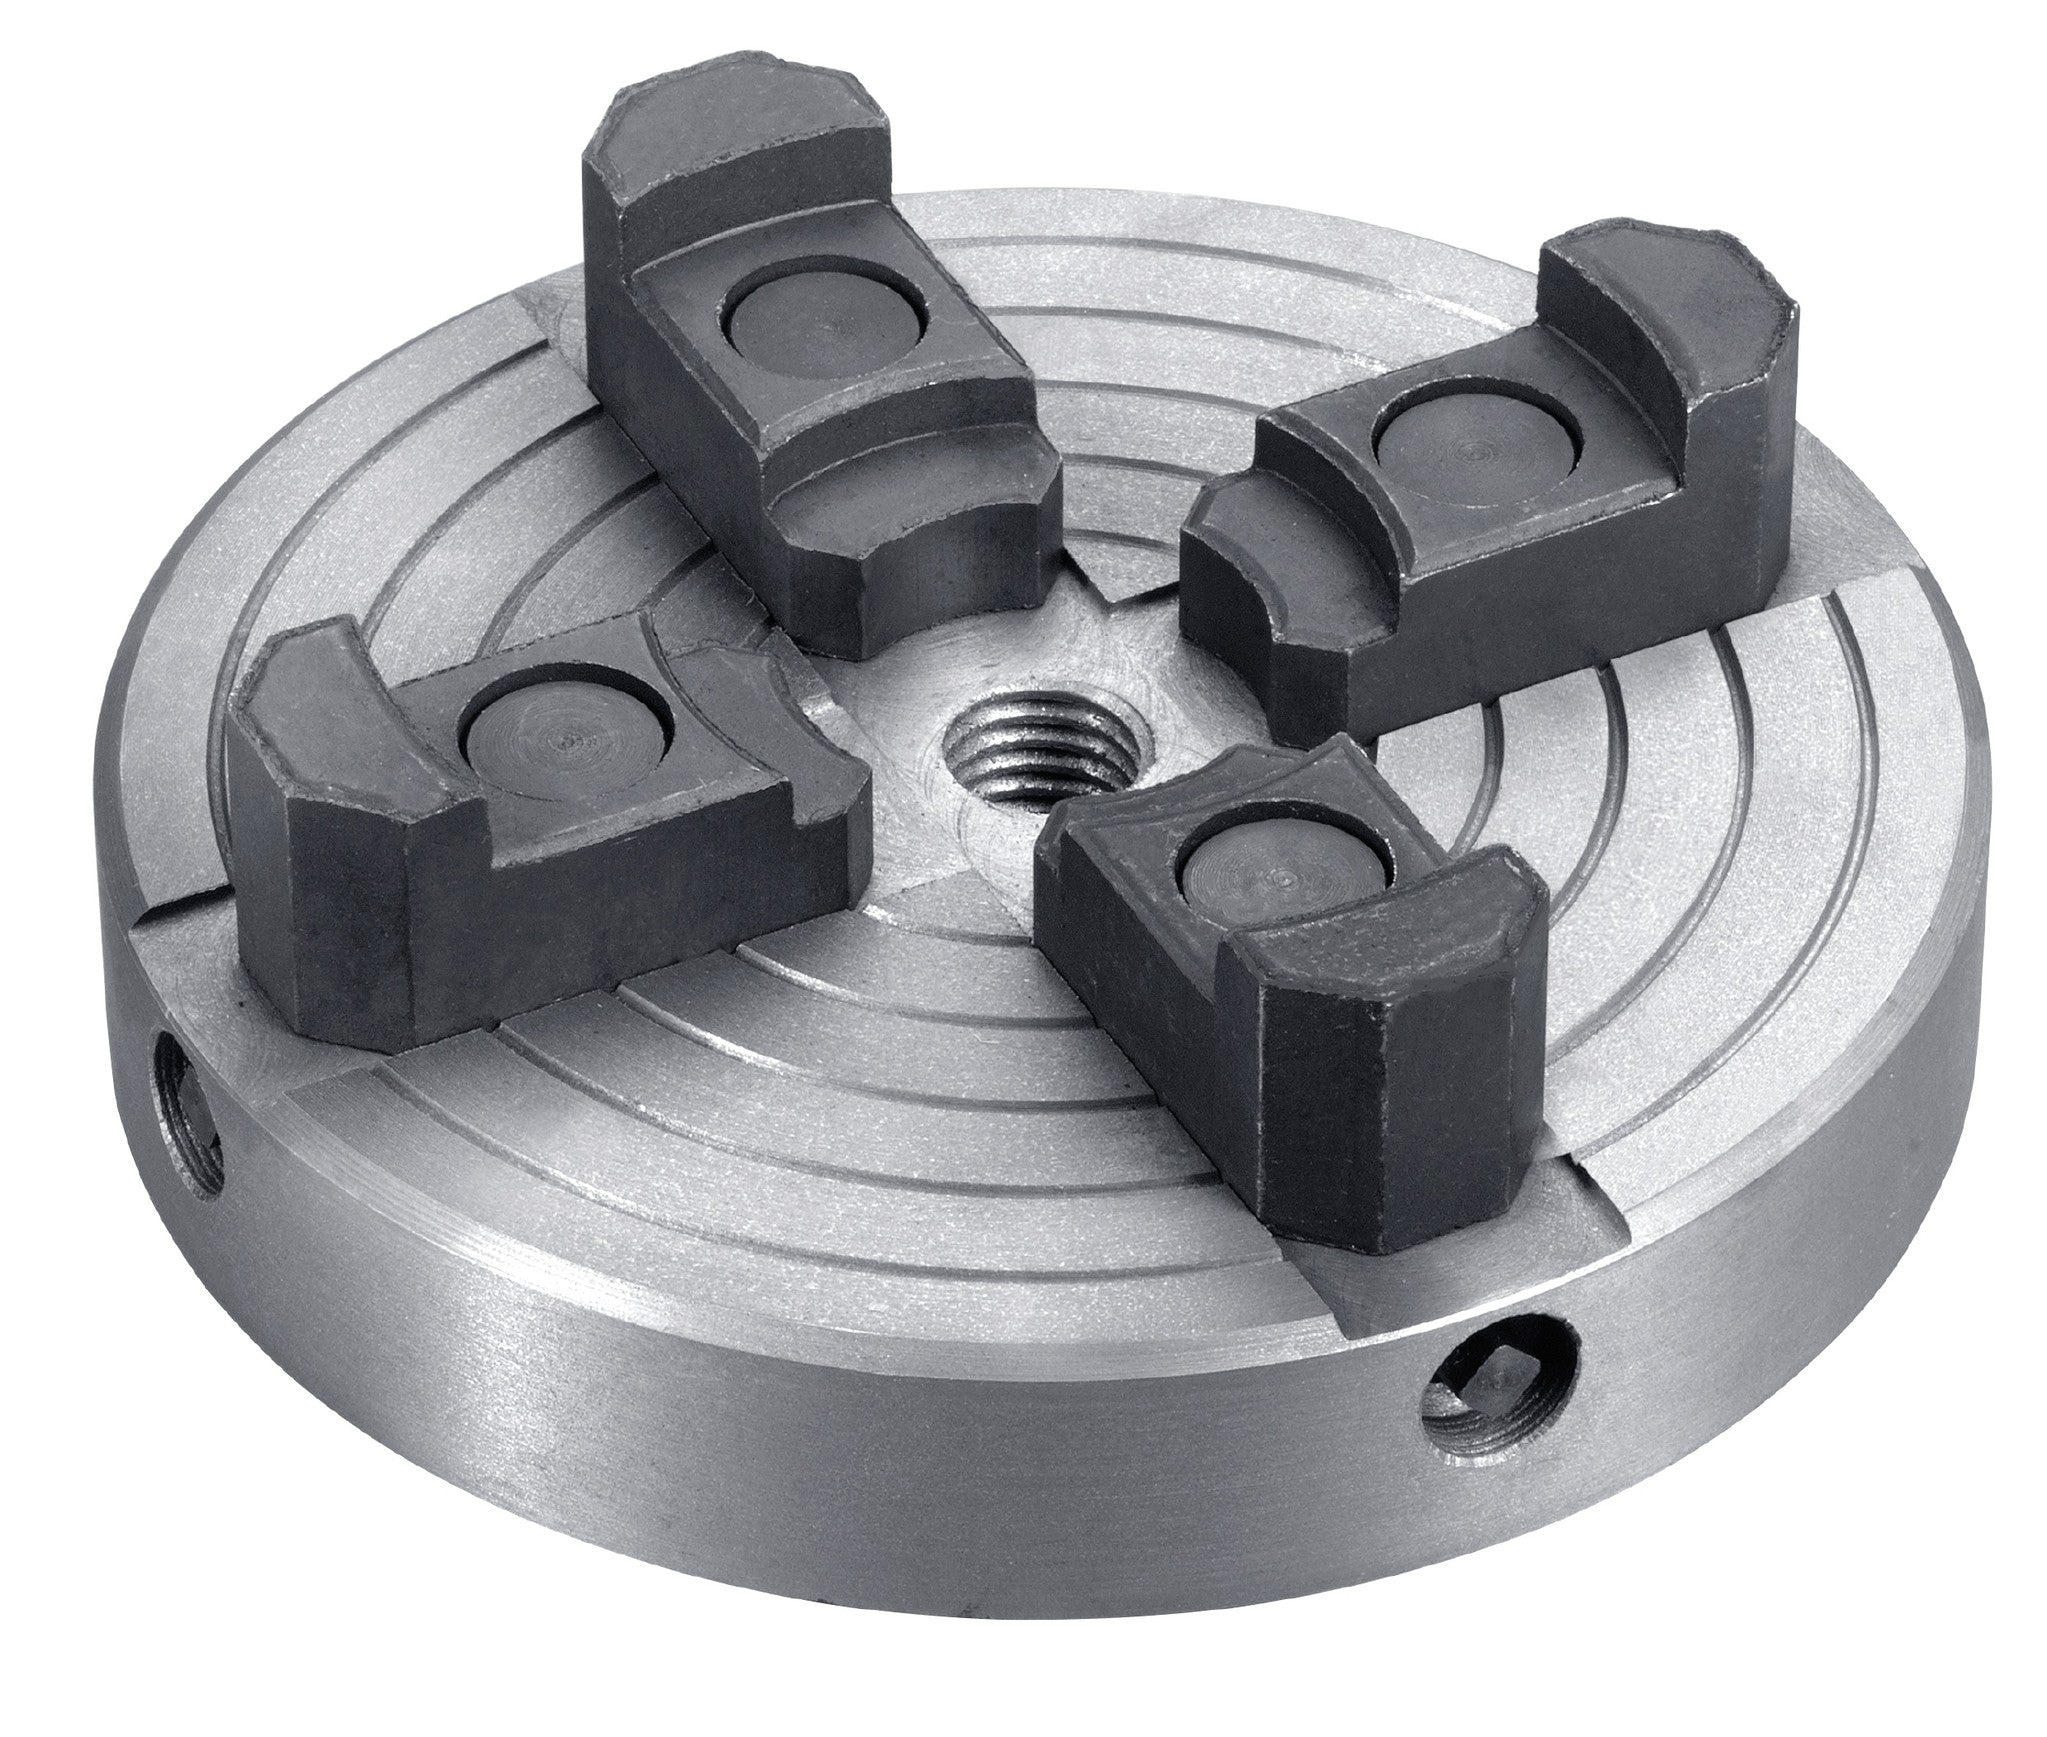 Einhell 4 Jaw chuck for Lathe Power Tool Services